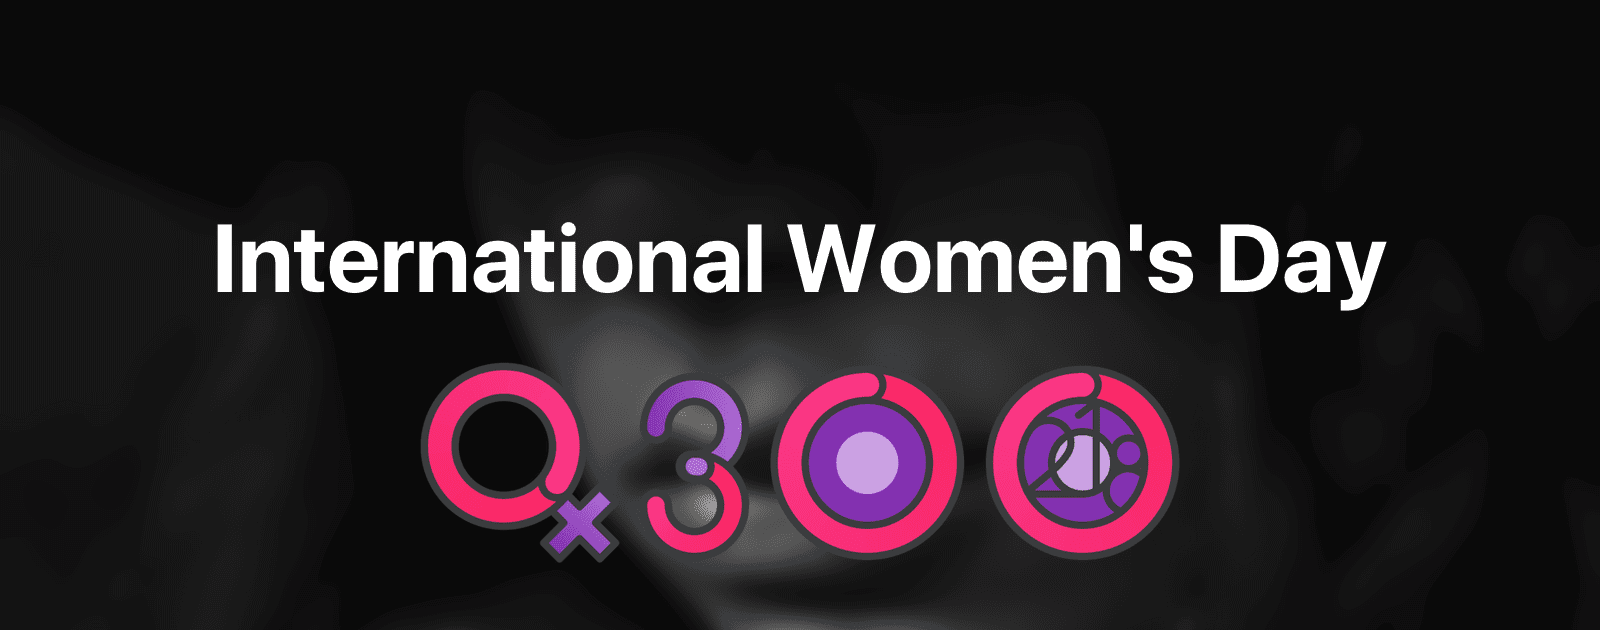 Get Ready for an International Women’s Day Activity Challenge March 8